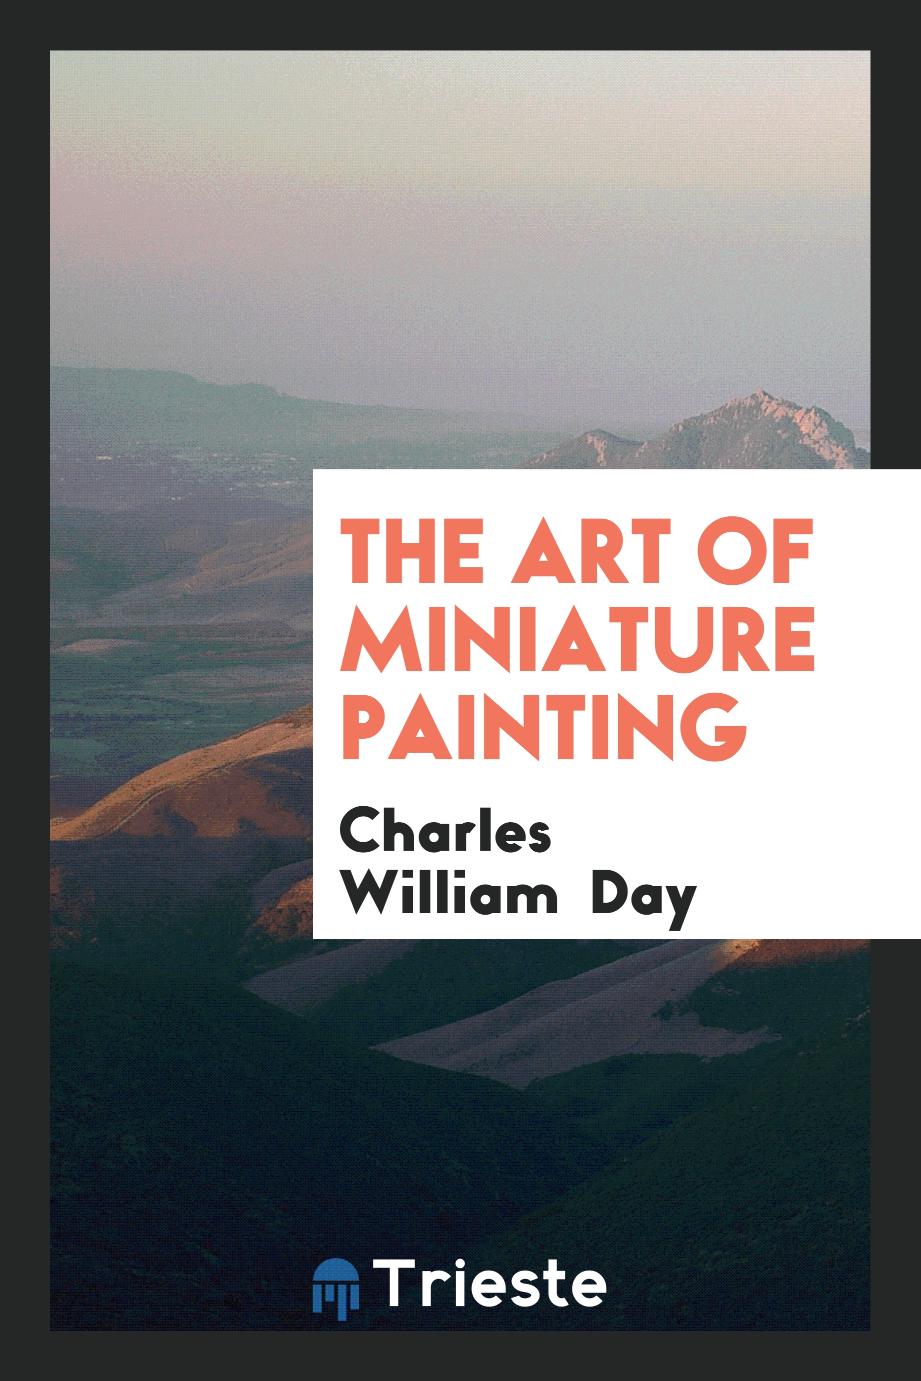 The art of miniature painting